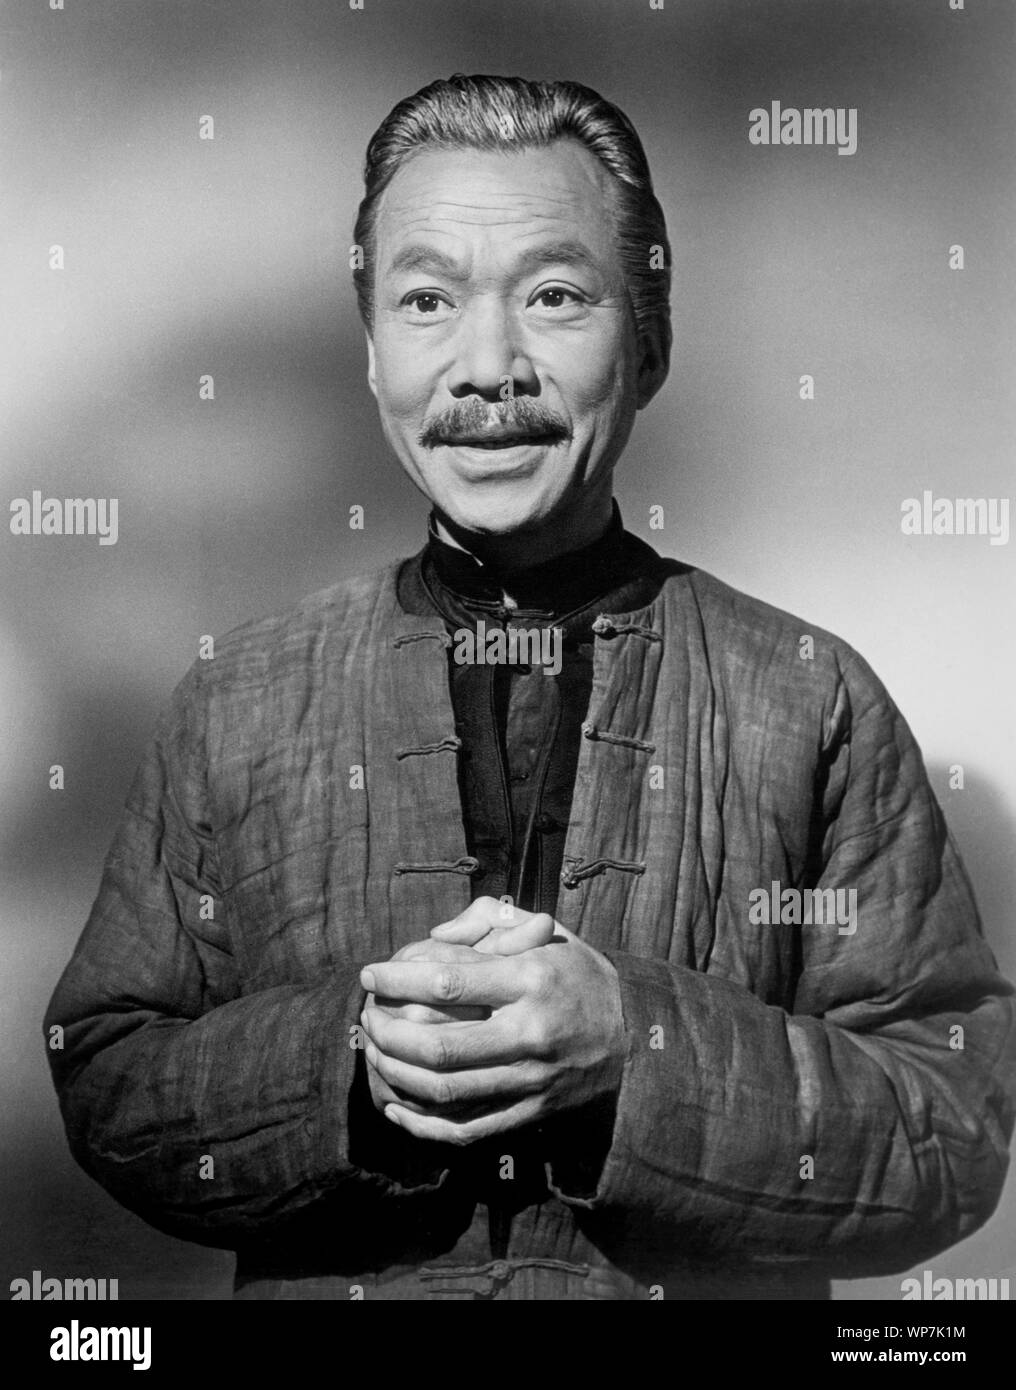 Kam Tong, Publicity Portrait for the Film, 'Flower Drum Song', Universal Pictures, 1961 Stock Photo